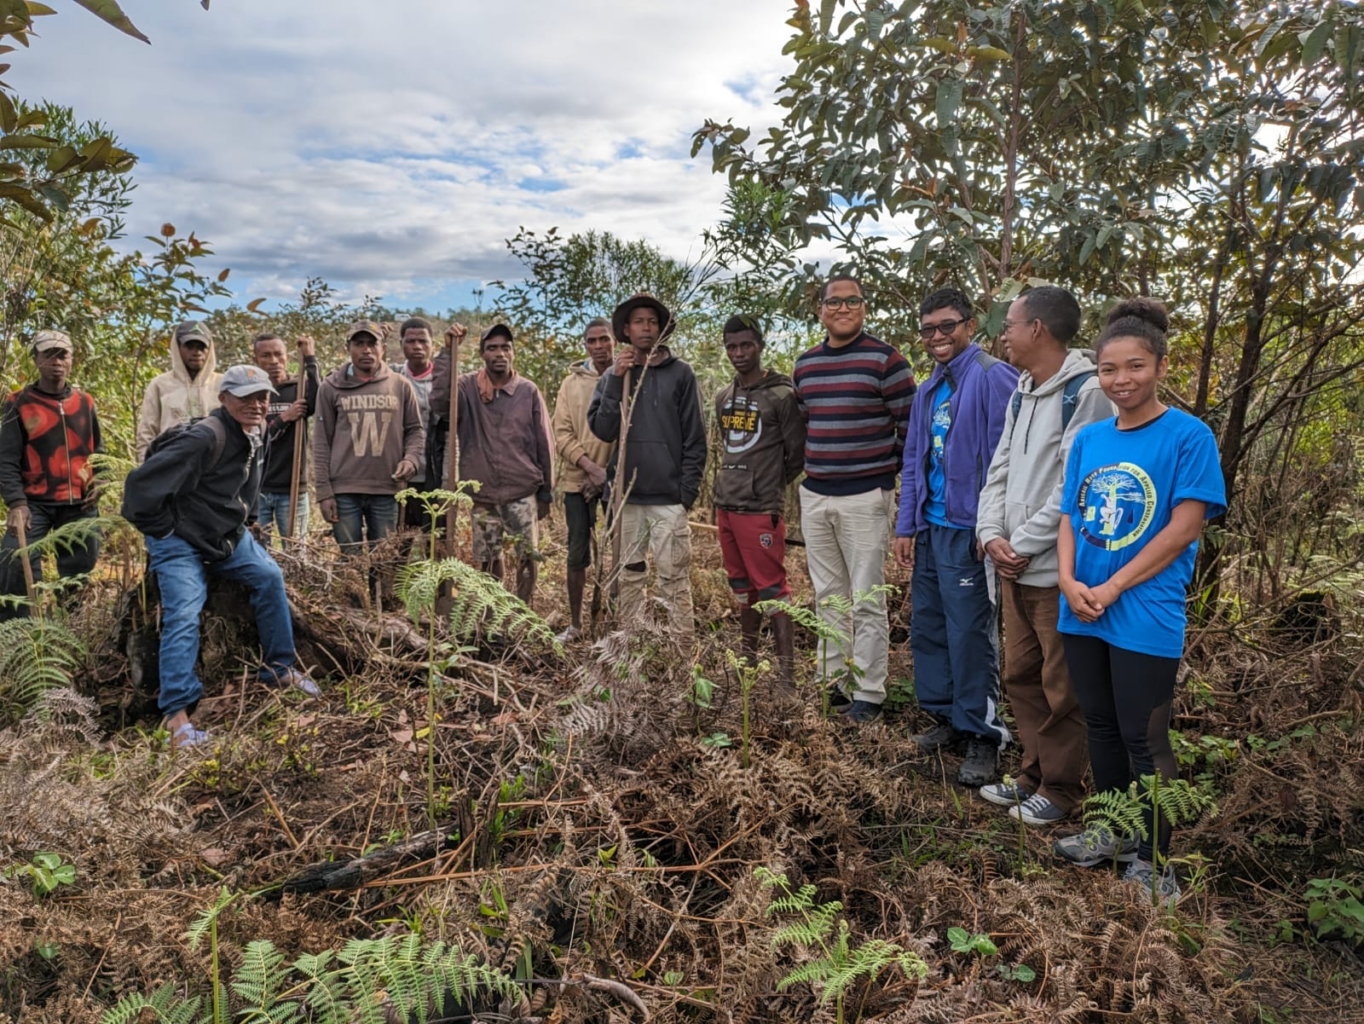 Our project partners plant trees to form a new wildlife corridor.